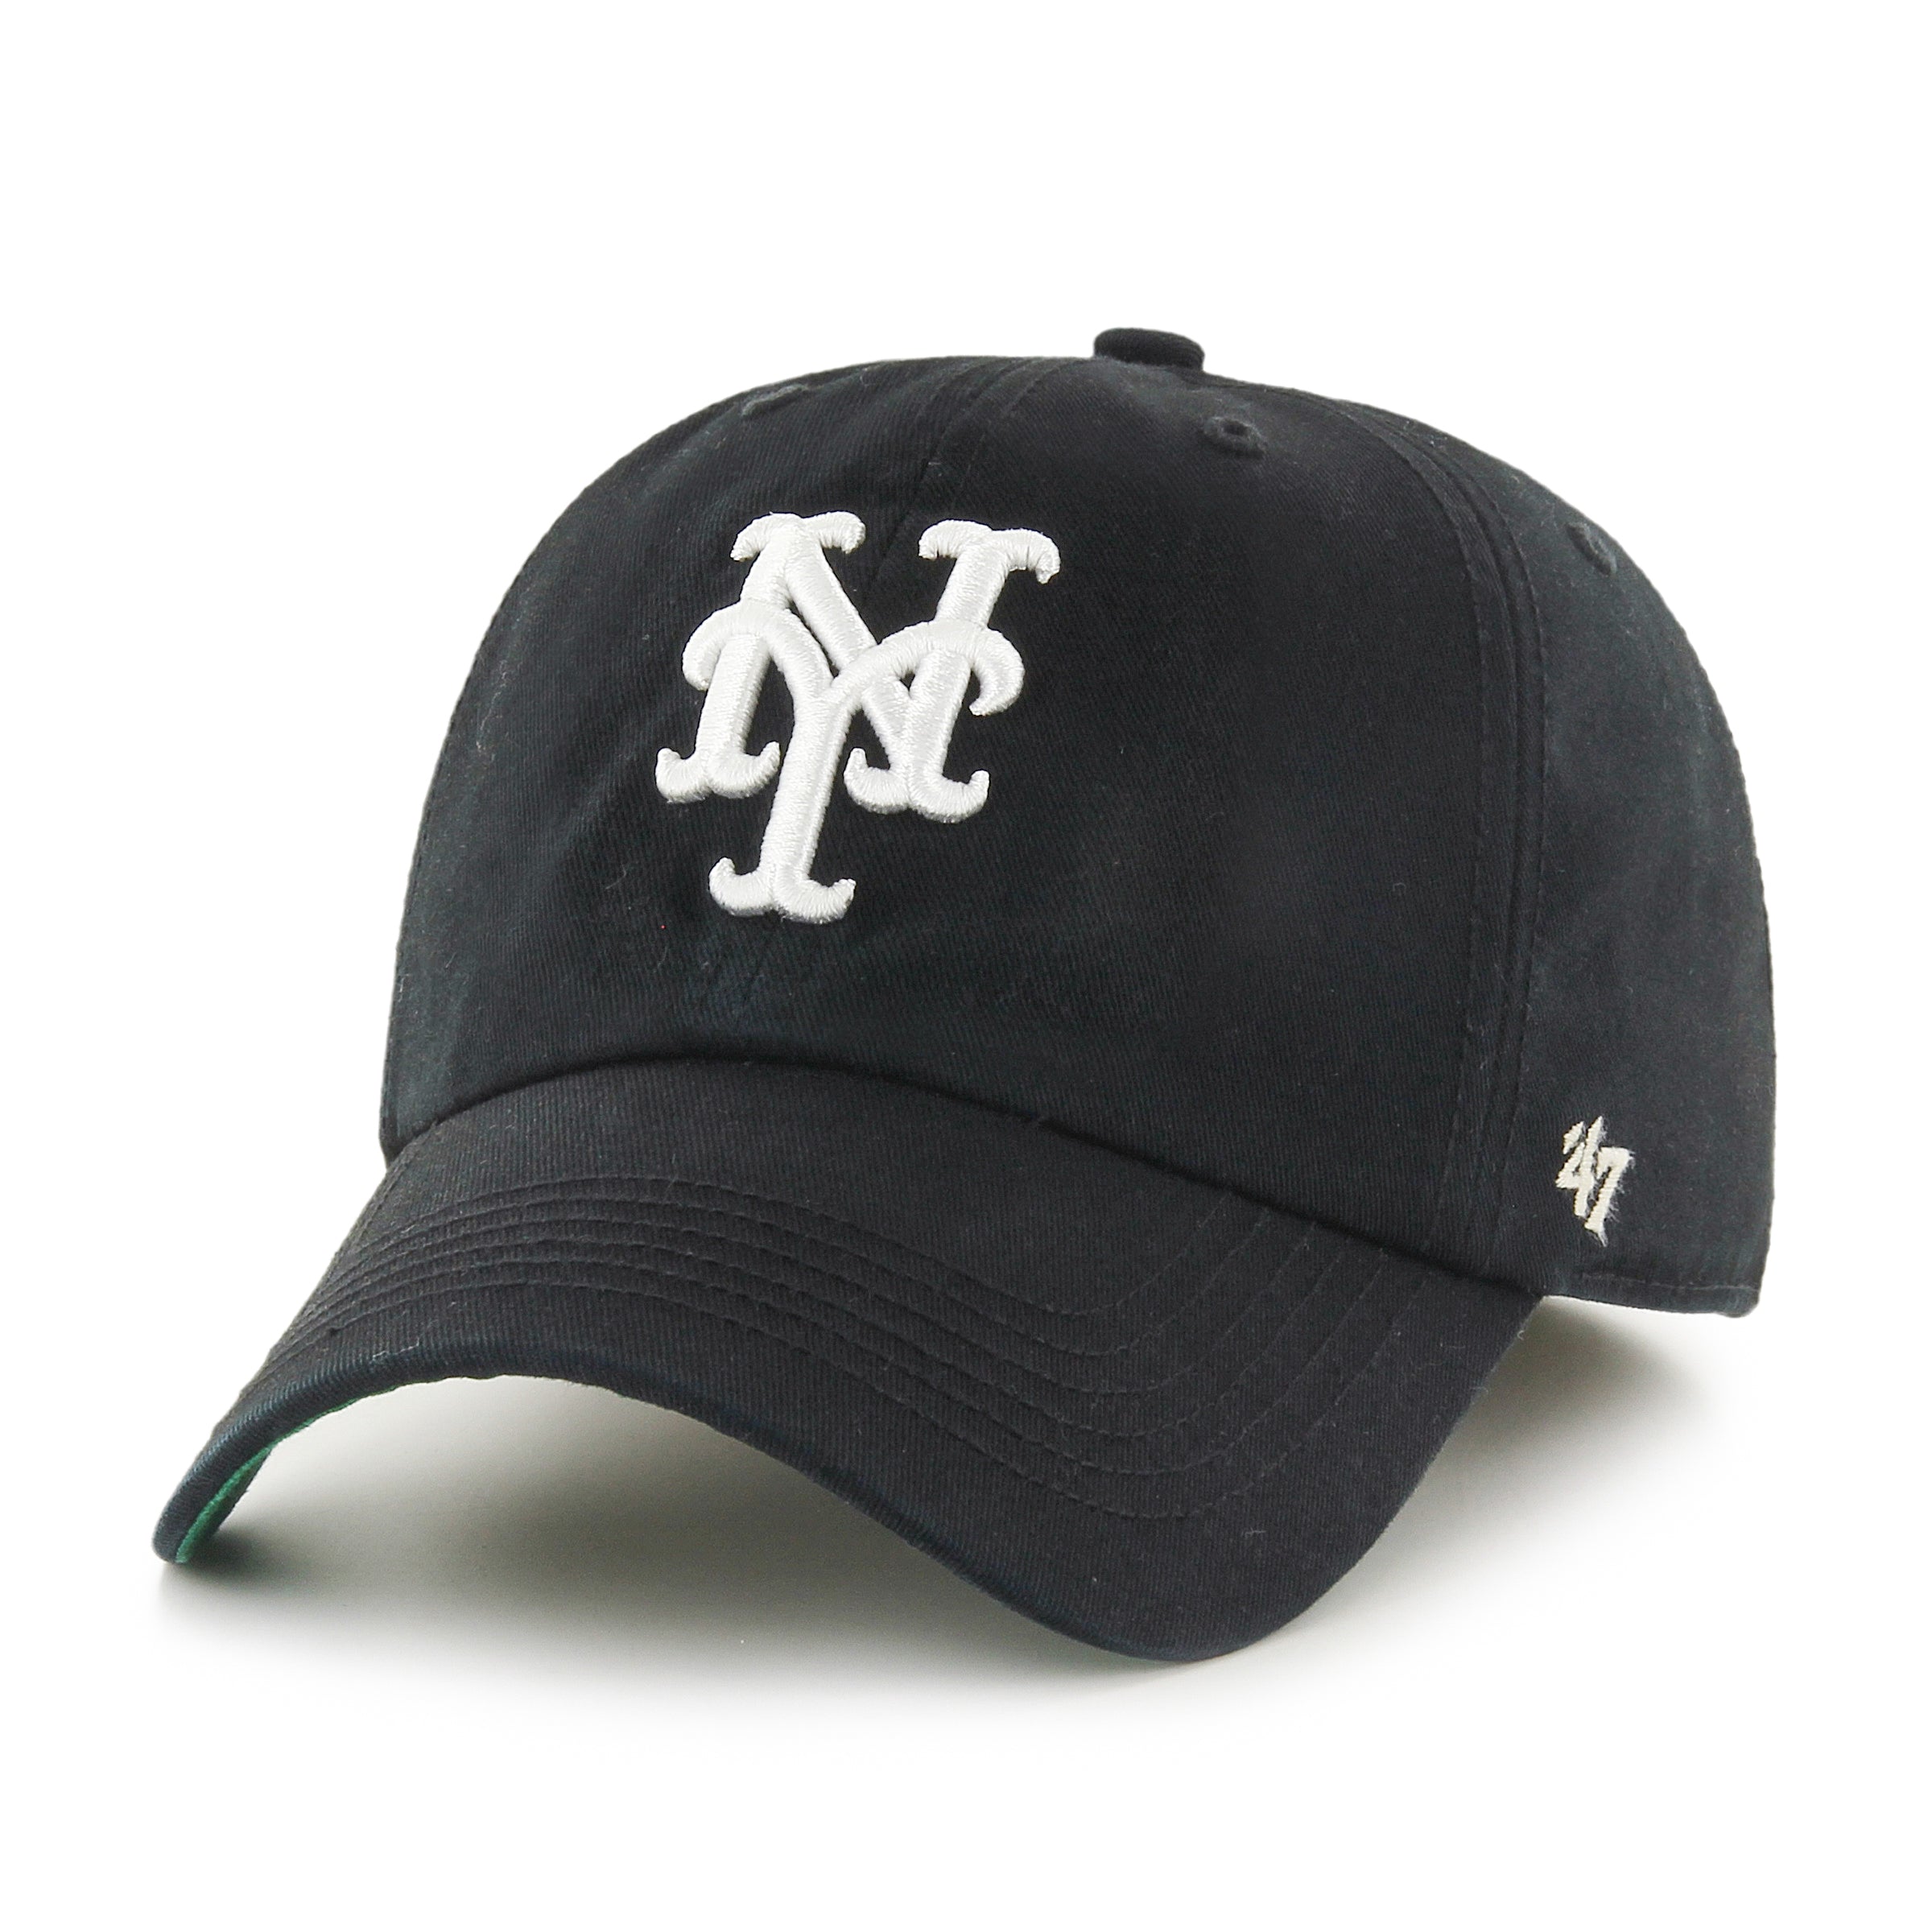 New York Mets '47 CLEAN UP